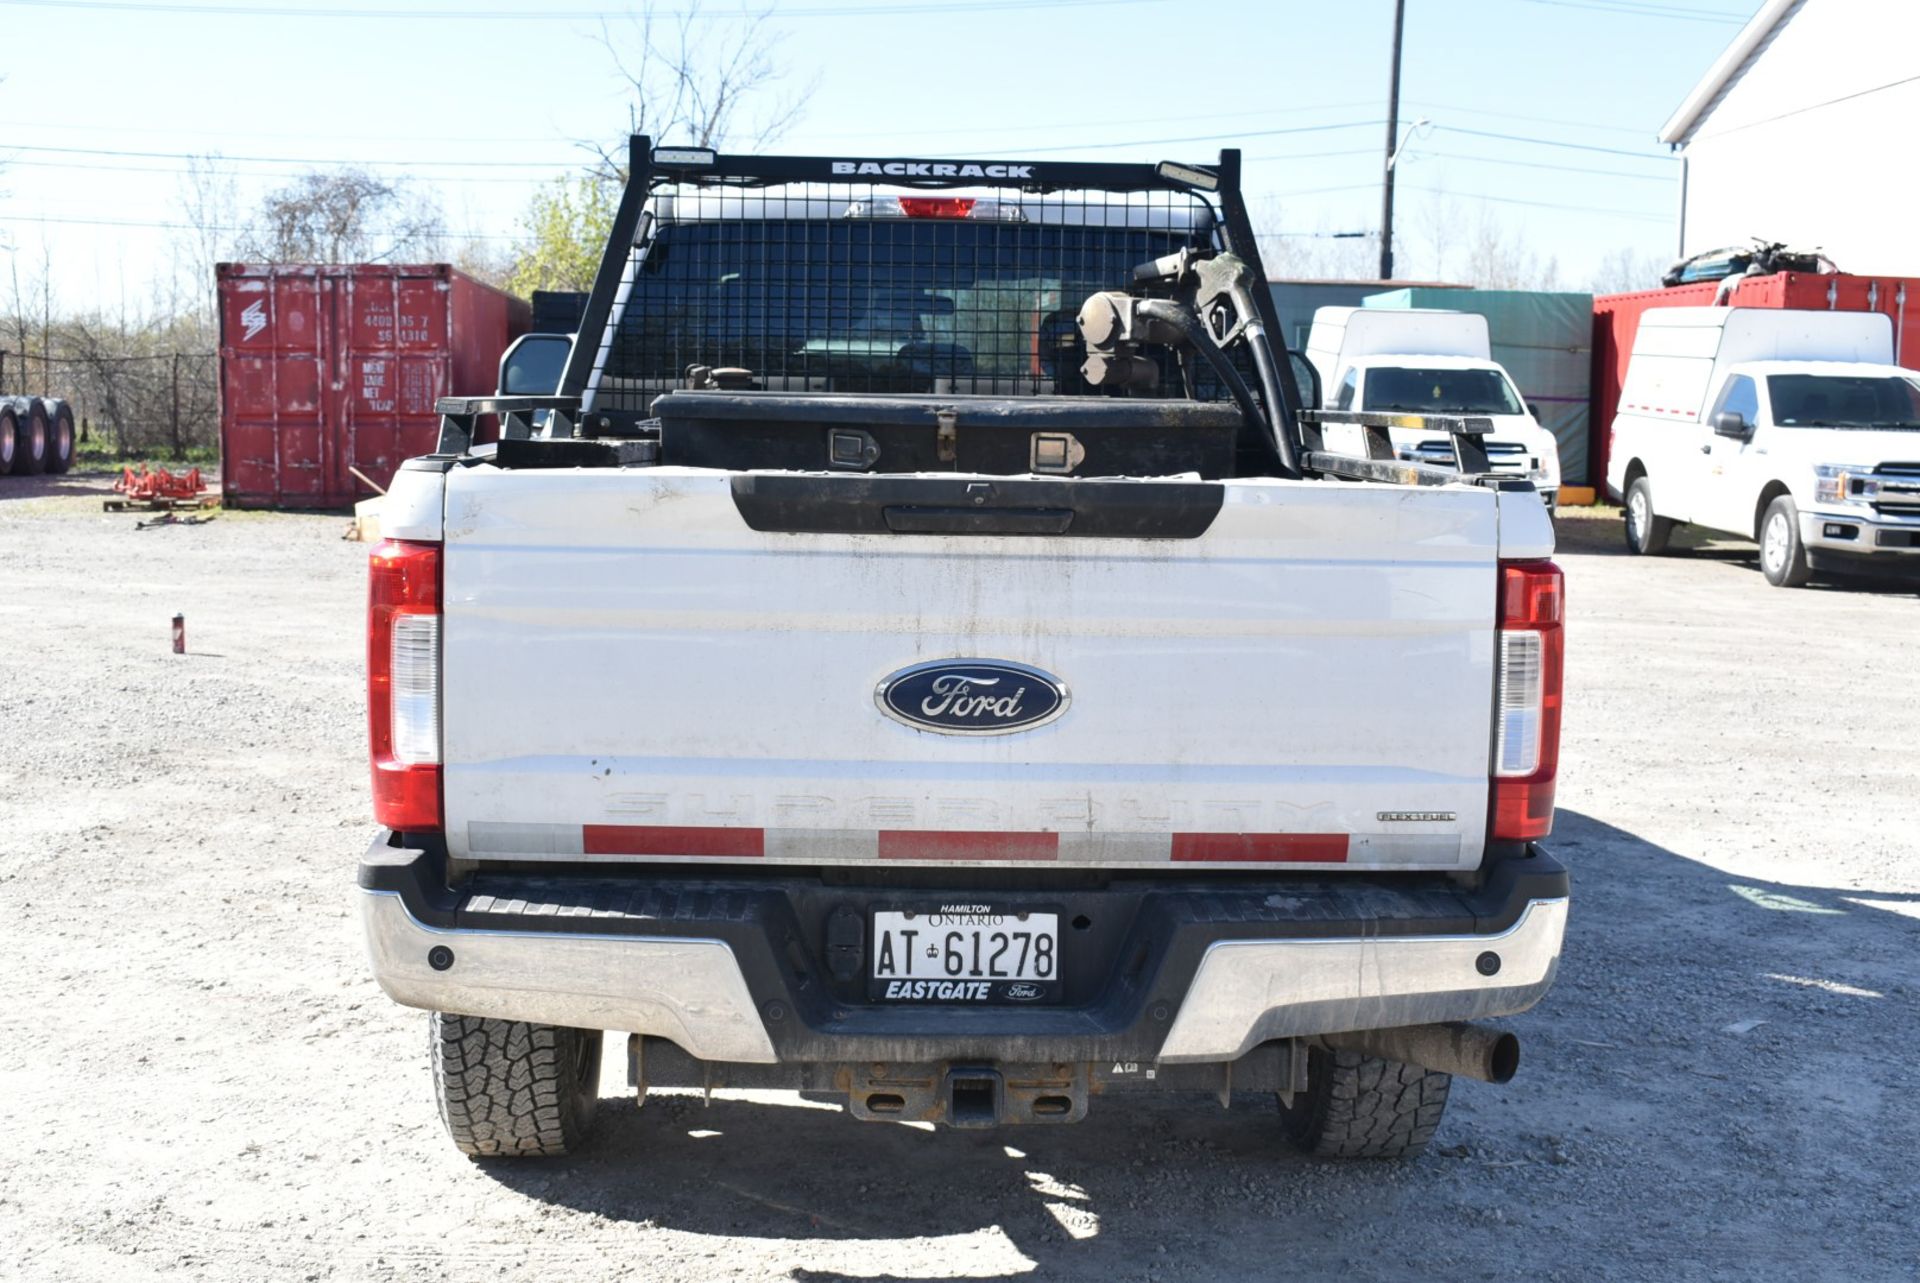 FORD (2017) F250 XLT SUPER DUTY CREW CAB PICKUP TRUCK WITH 6.2L 8 CYL. GAS ENGINE, AUTO. - Image 3 of 15